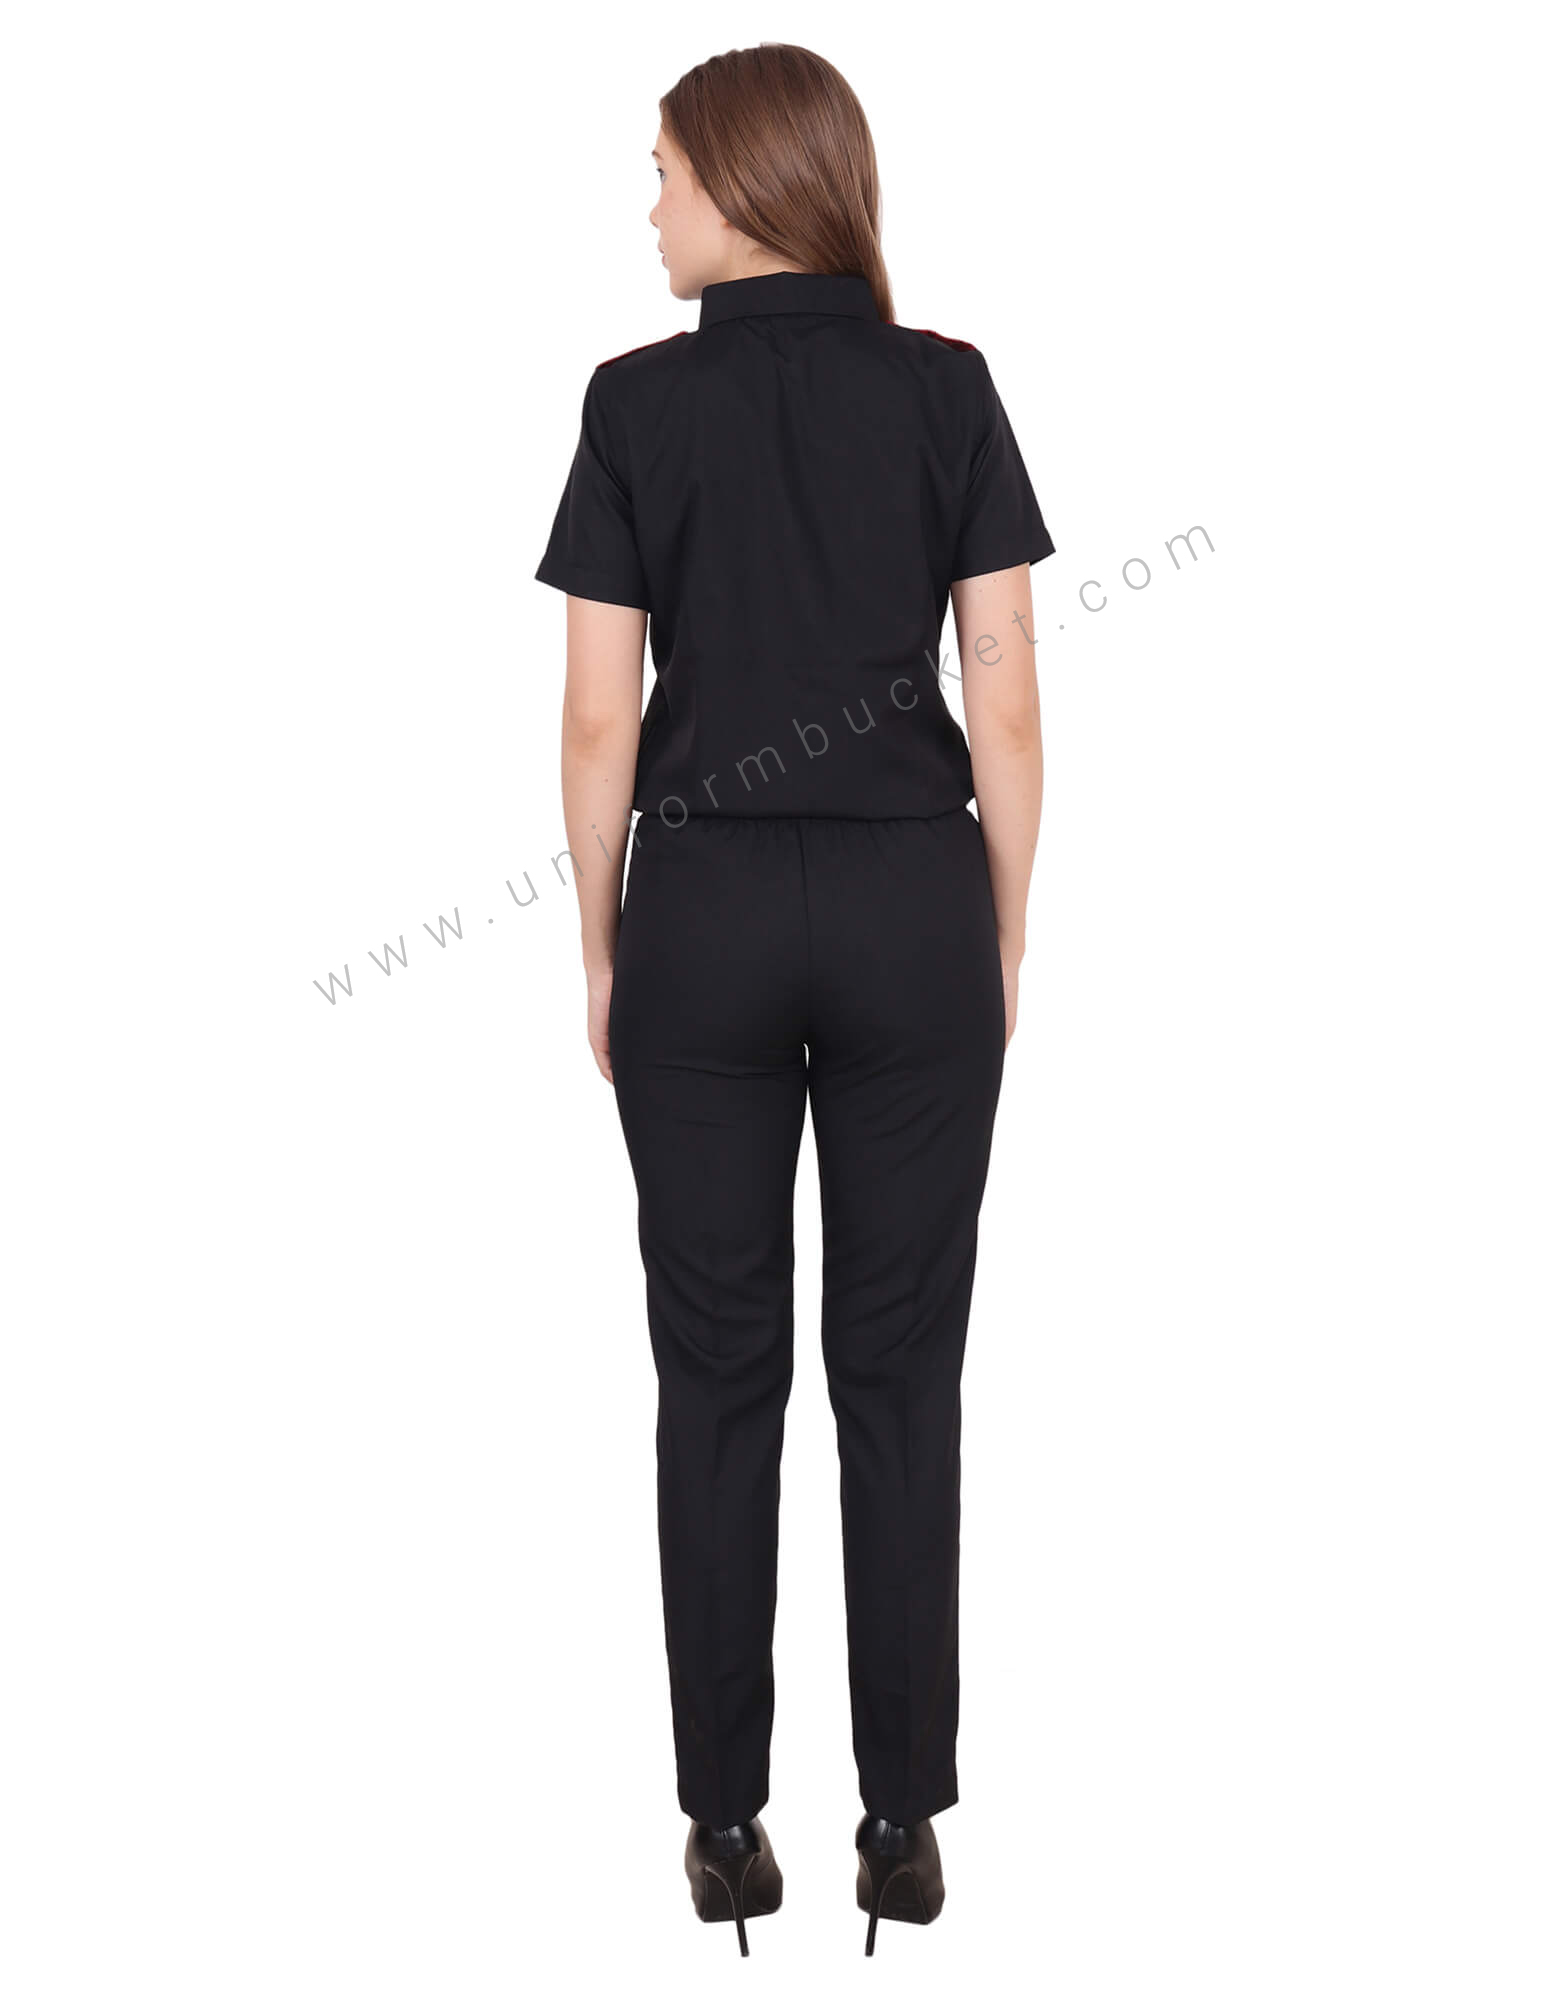 Black Security Guard Shirt For Female